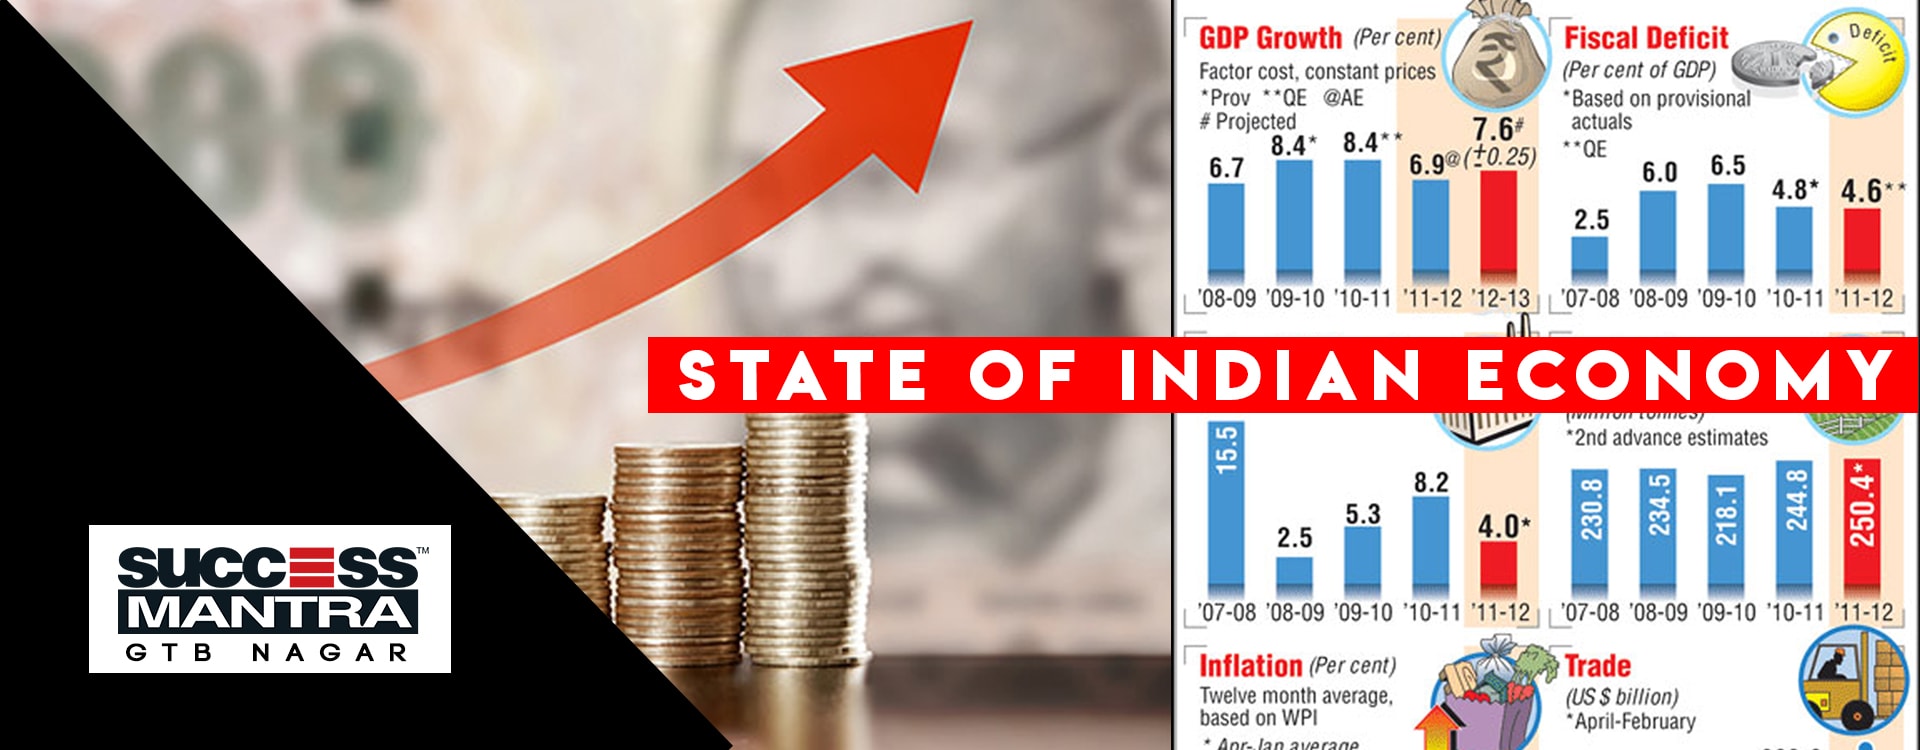 STATE OF INDIAN ECONOMY 